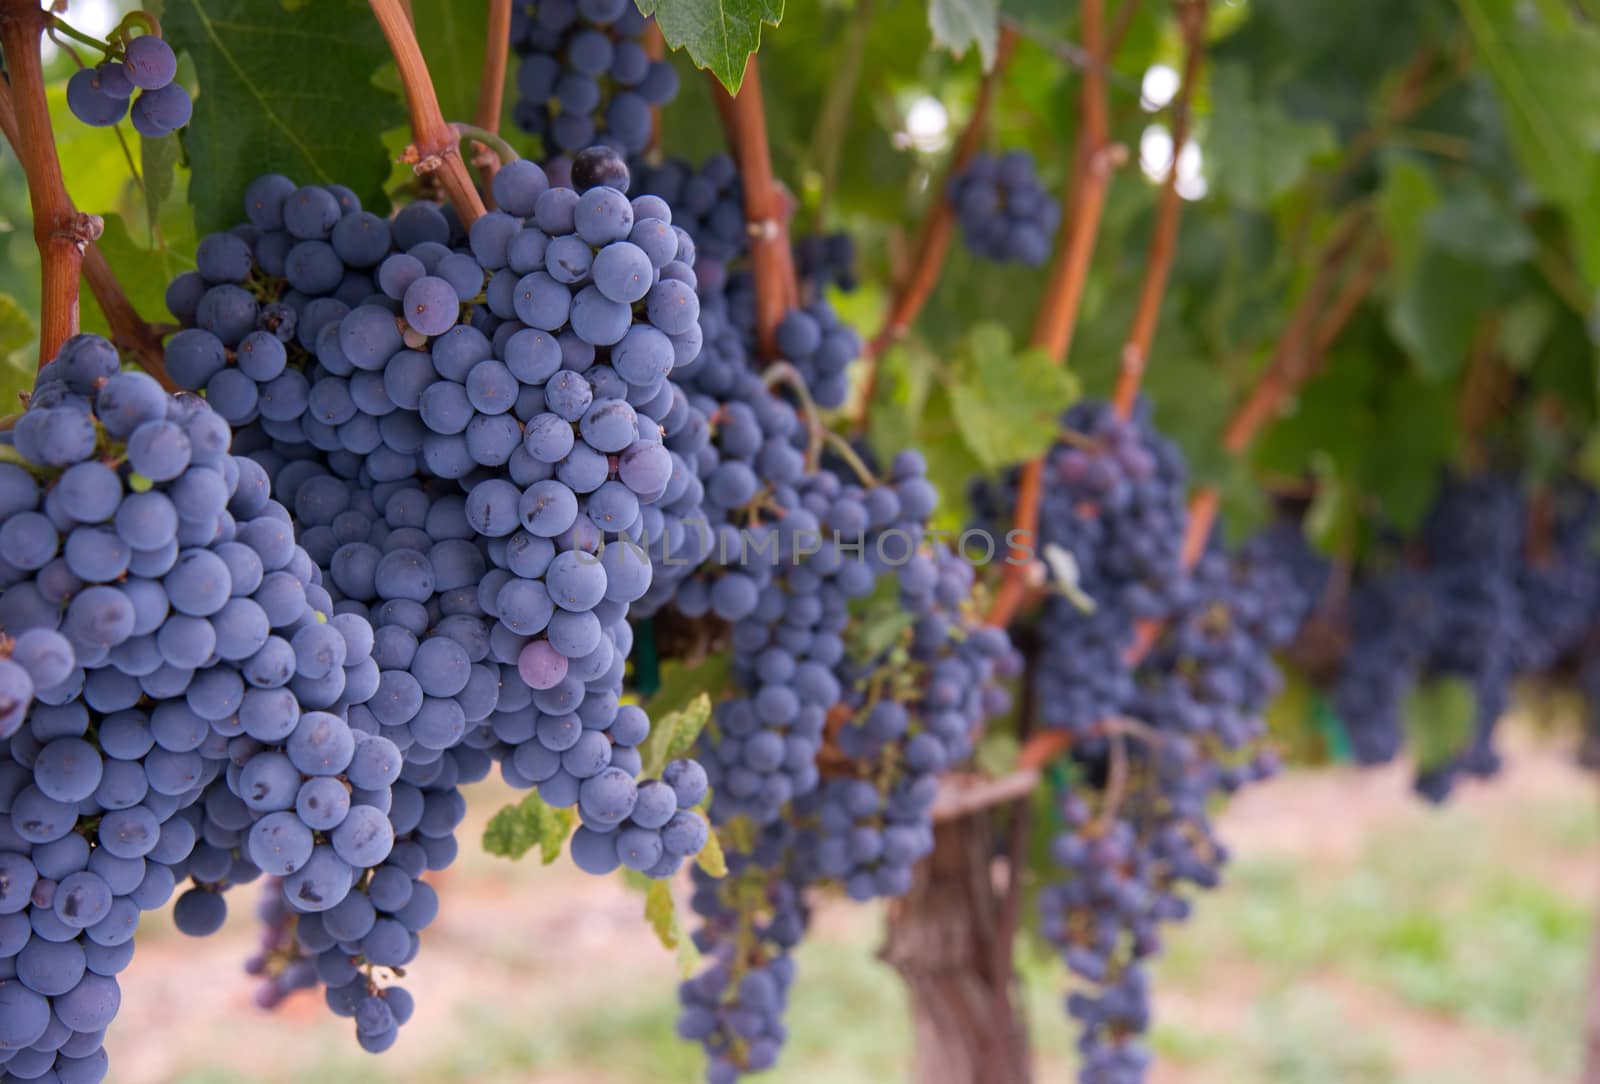 Amazing succulent Grapes on the Vine just before harvest